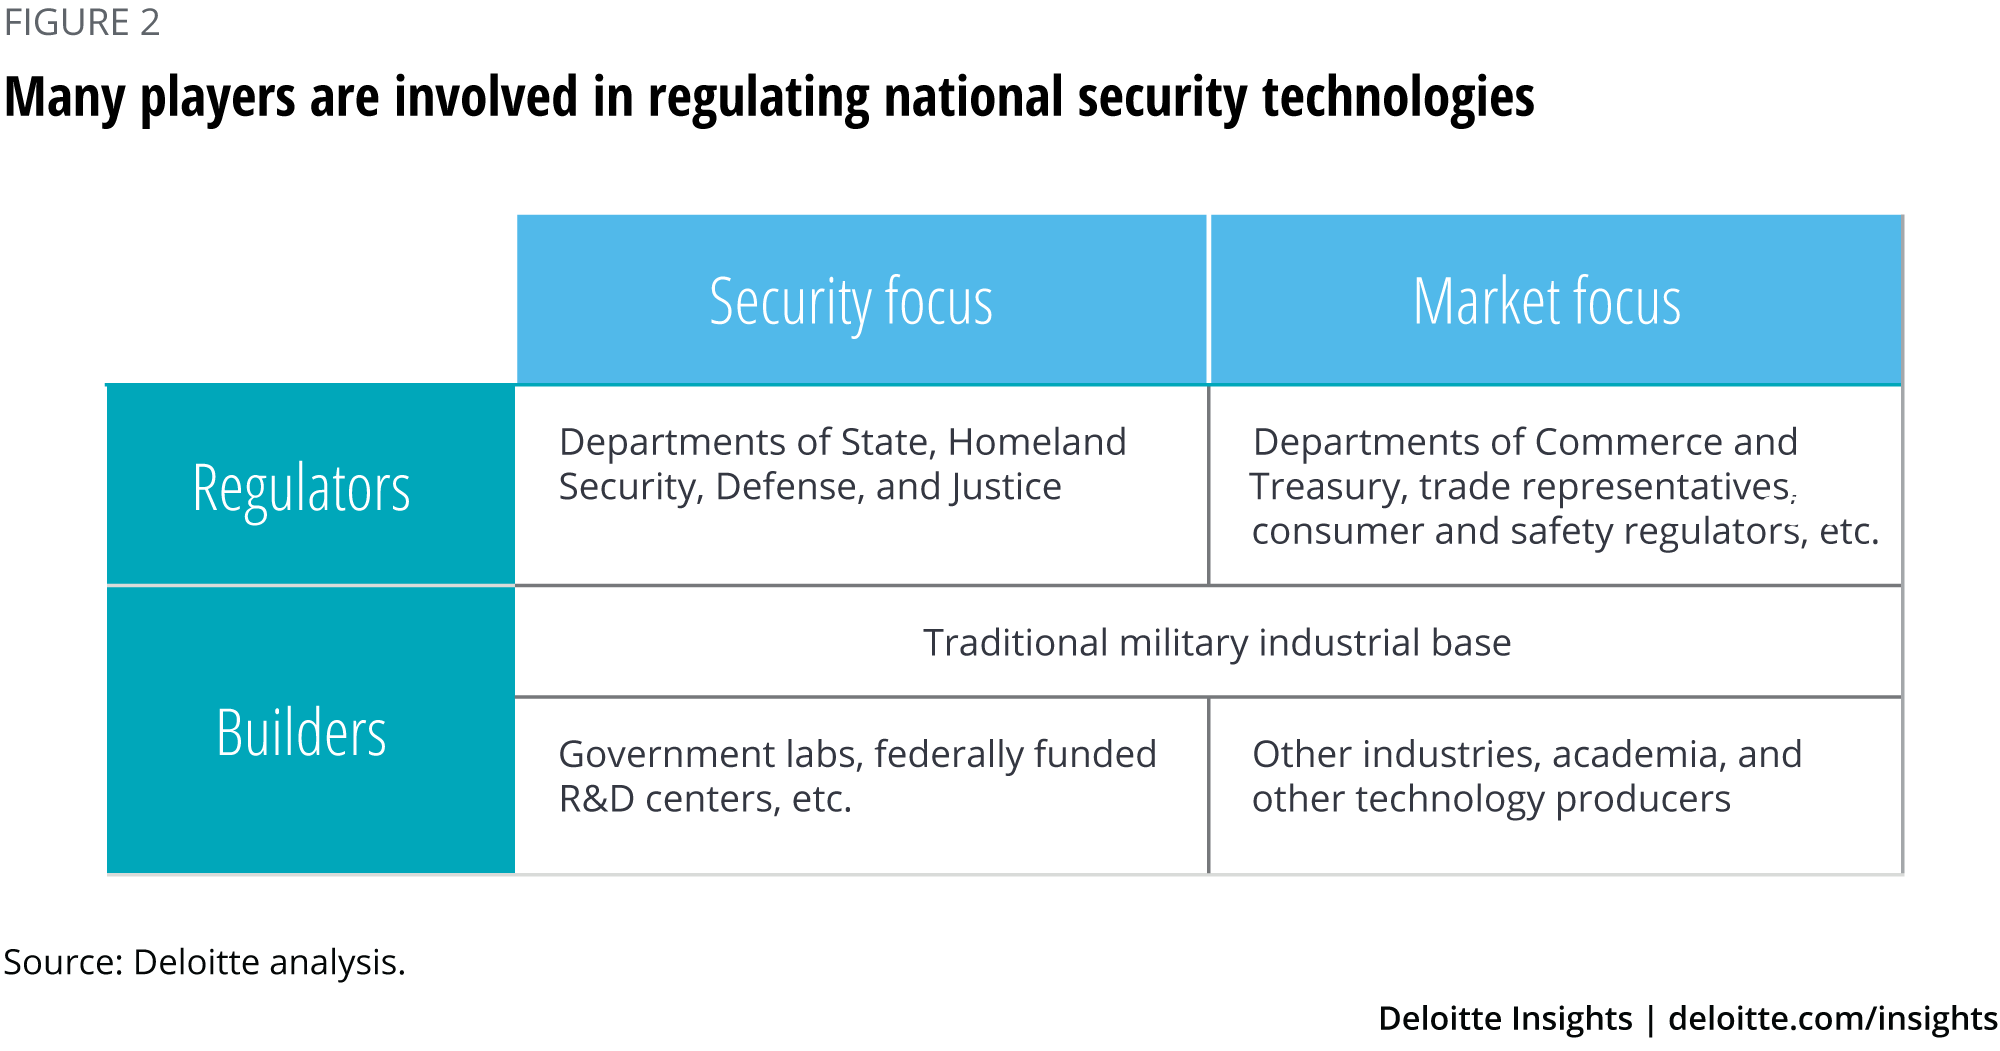 Many players are involved in regulating national security technologies